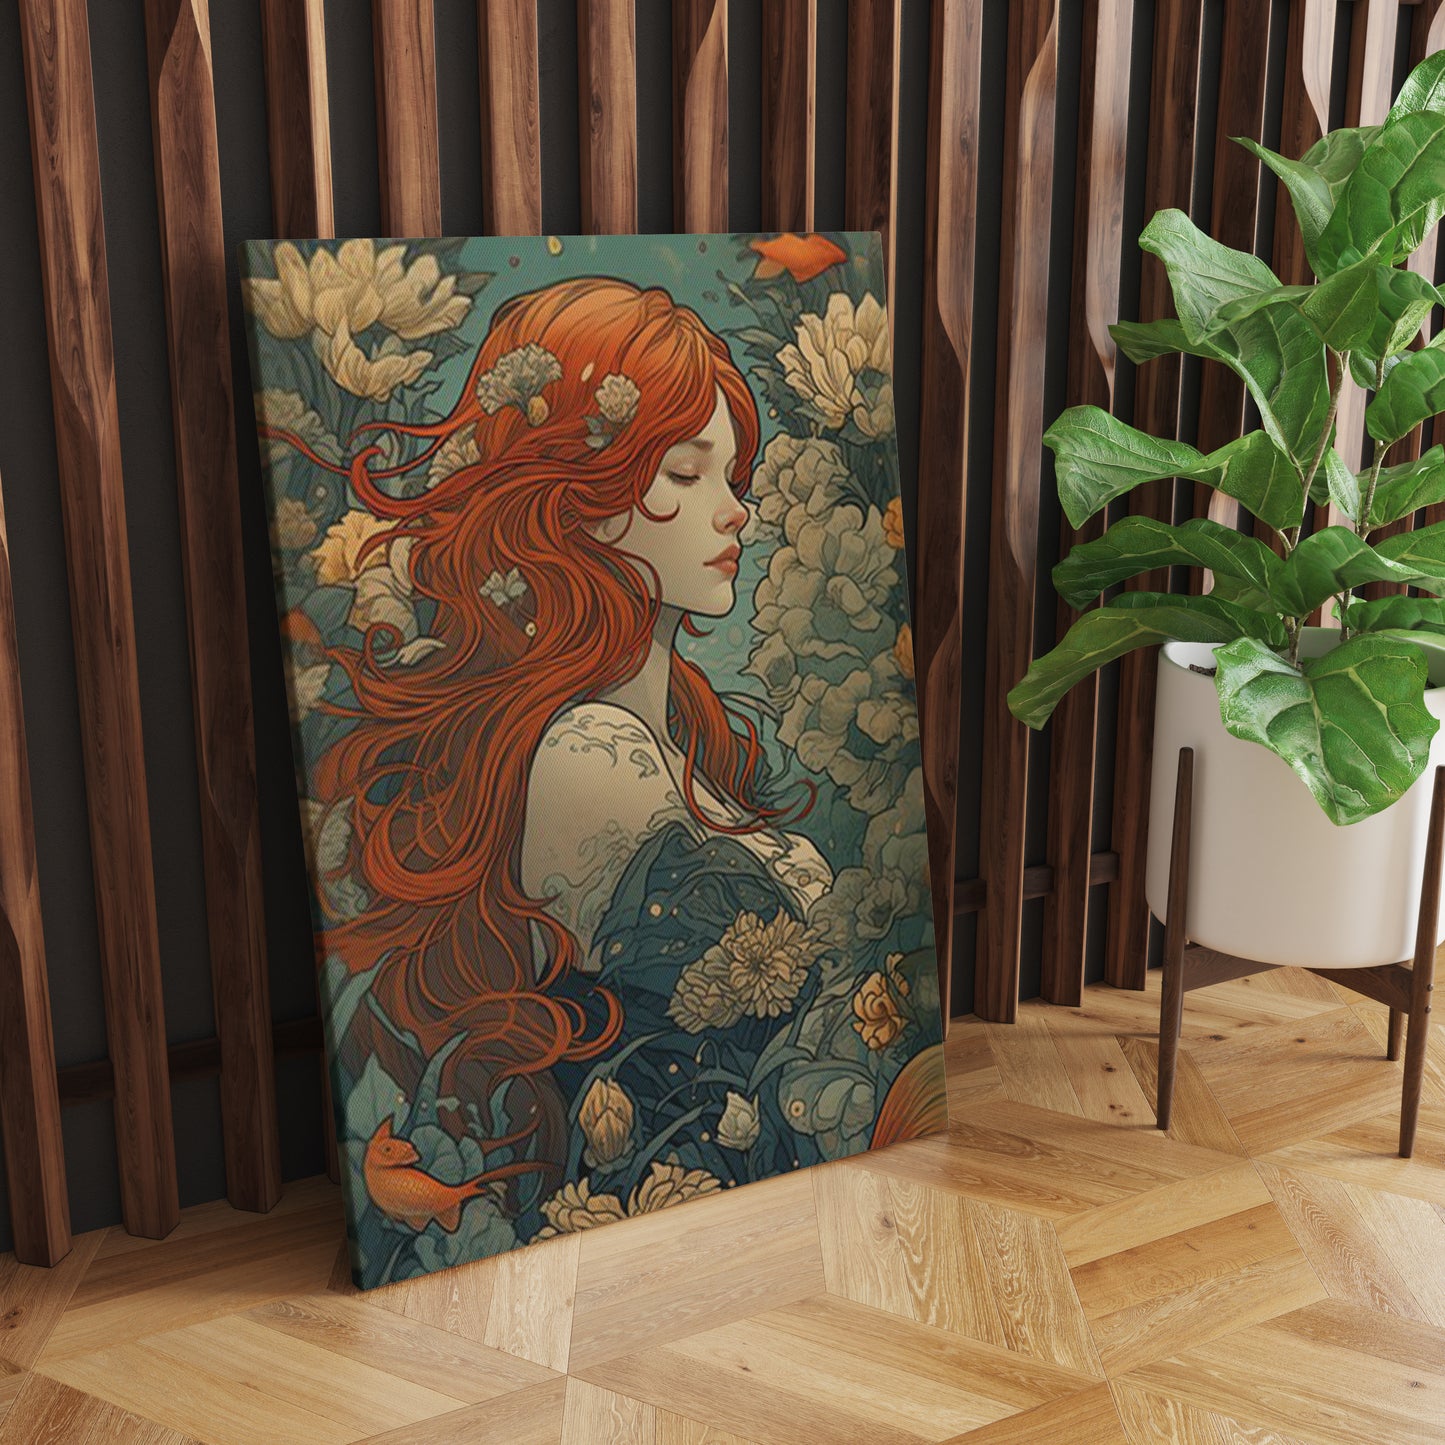 Contemporary Nouveau: Modern Mucha Style Lady - Striking Wall Art Celebrating the Fusion of Art Nouveau Elegance and Contemporary Expression - S06E11